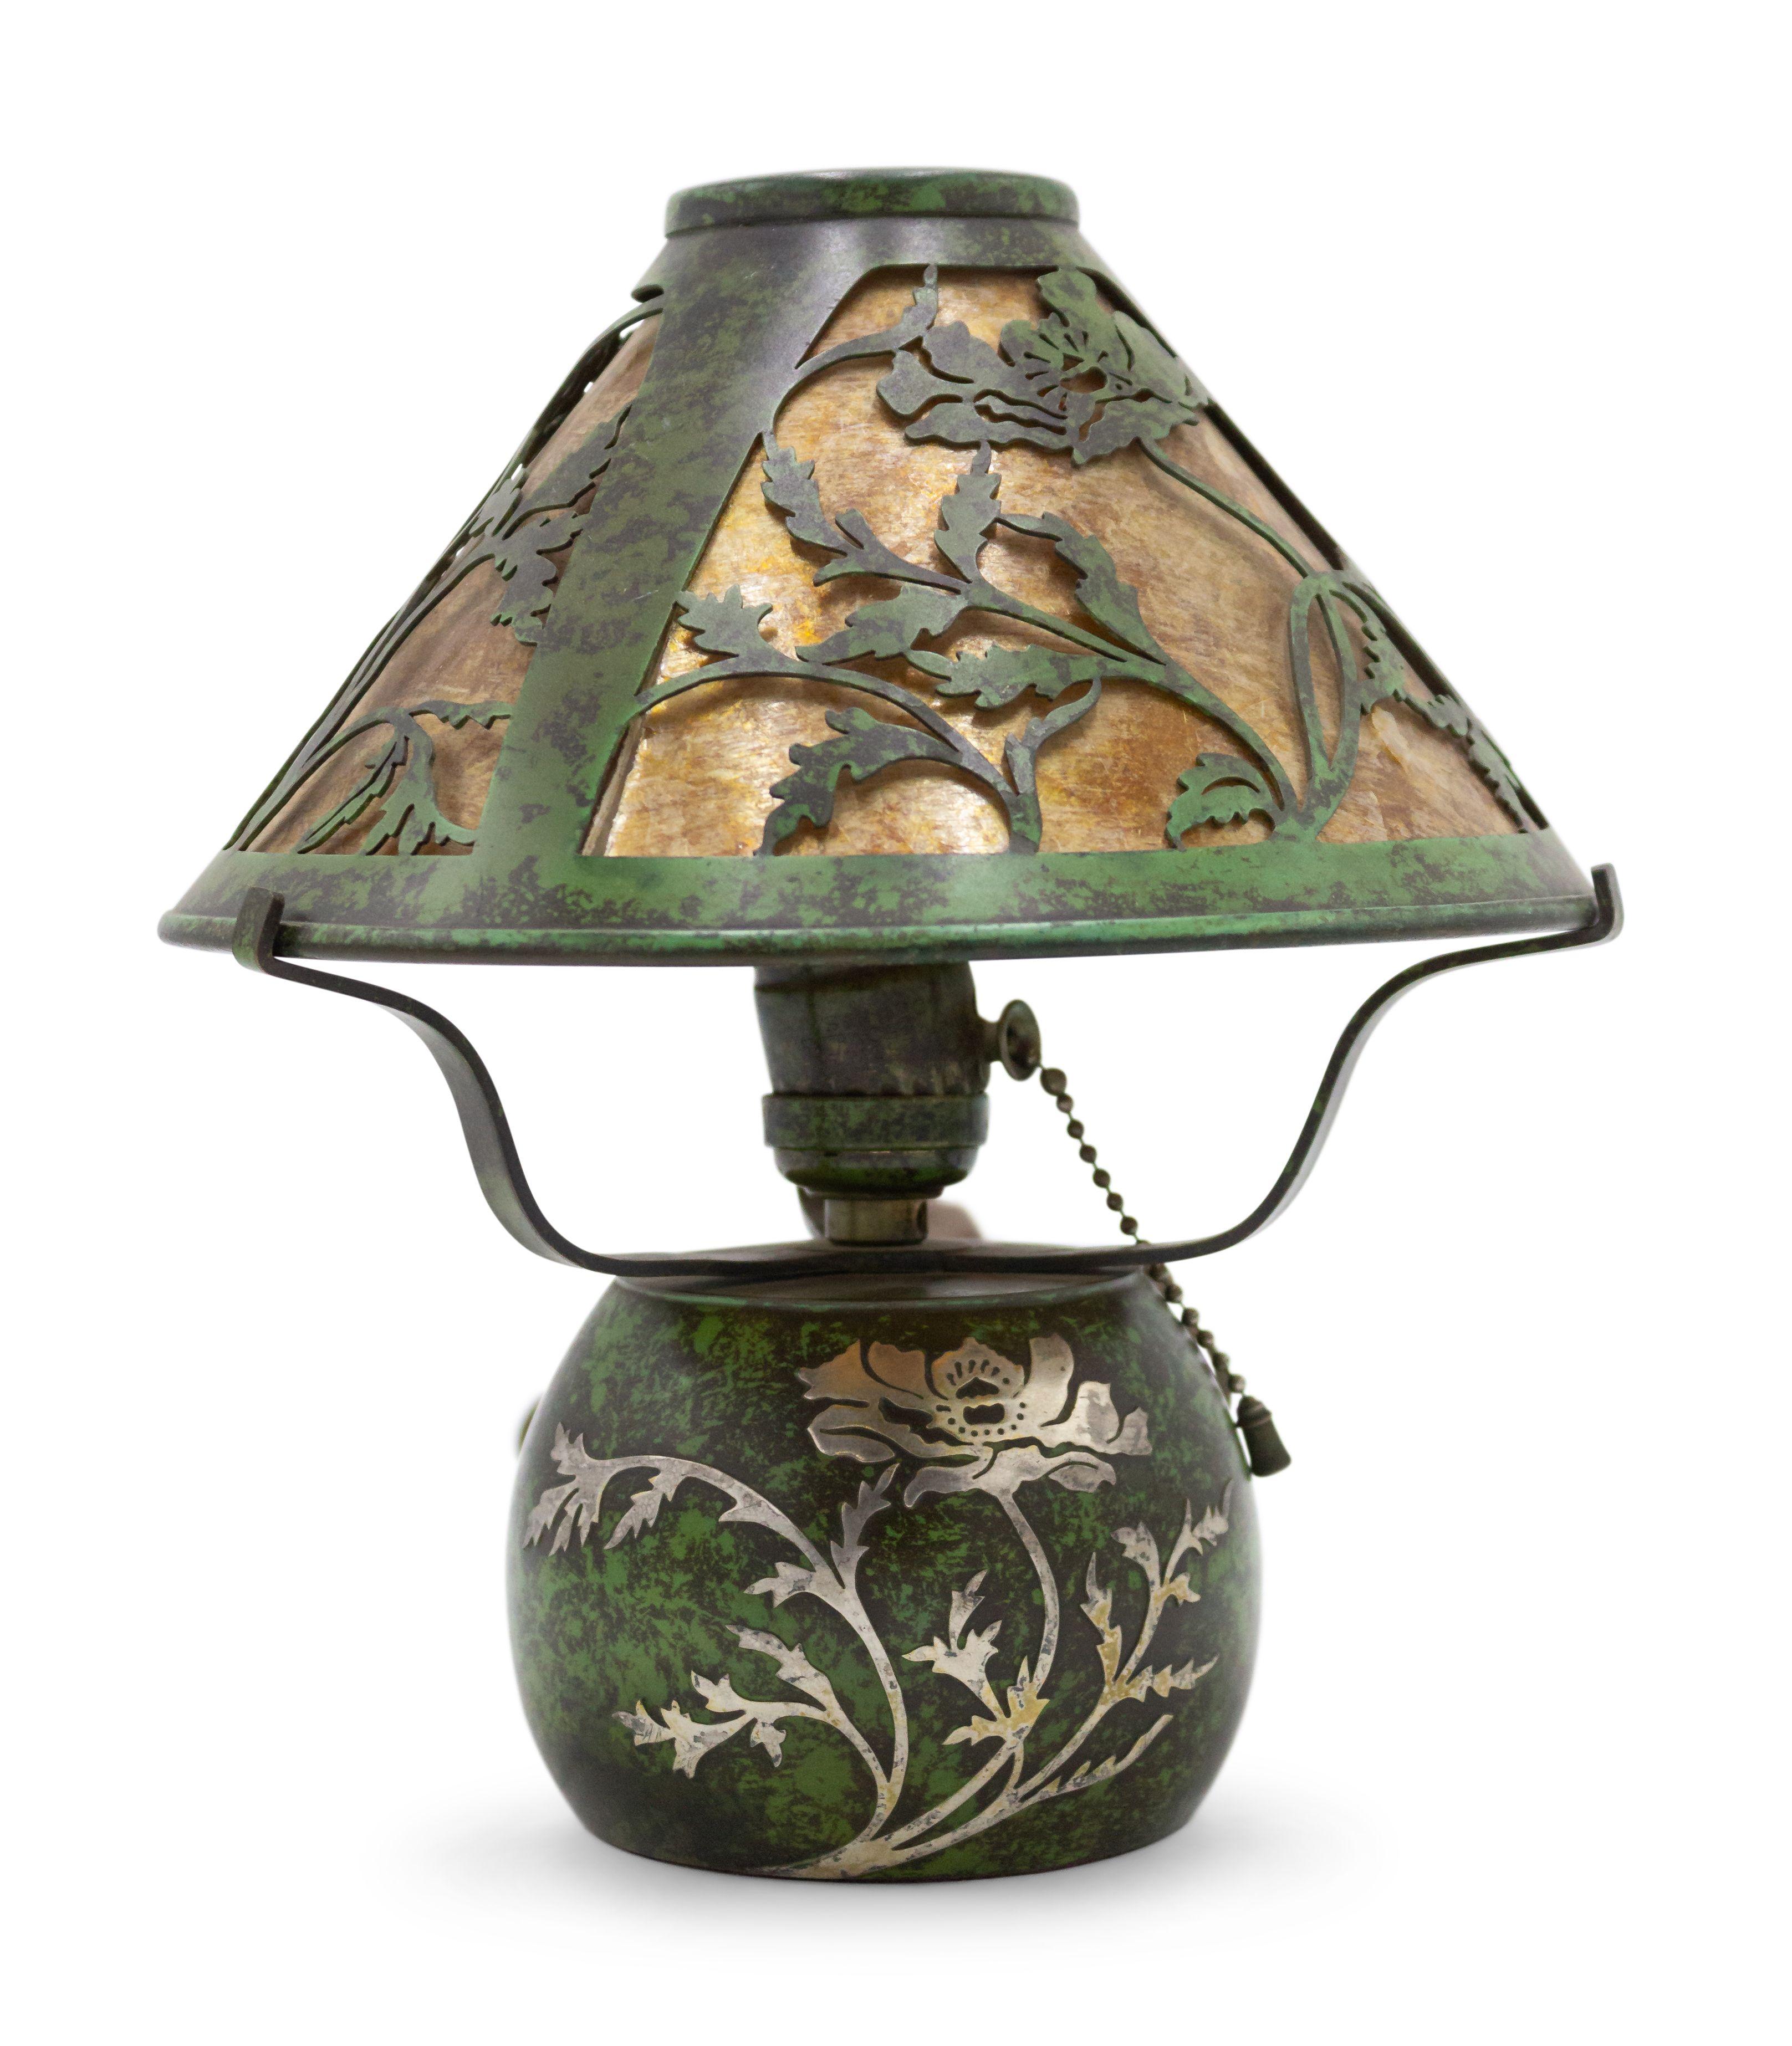 Pair of American Mission bronze green patina boudoir table lamps with floral silver deposit on base and filigree mica shade (Heintz Art Metal).